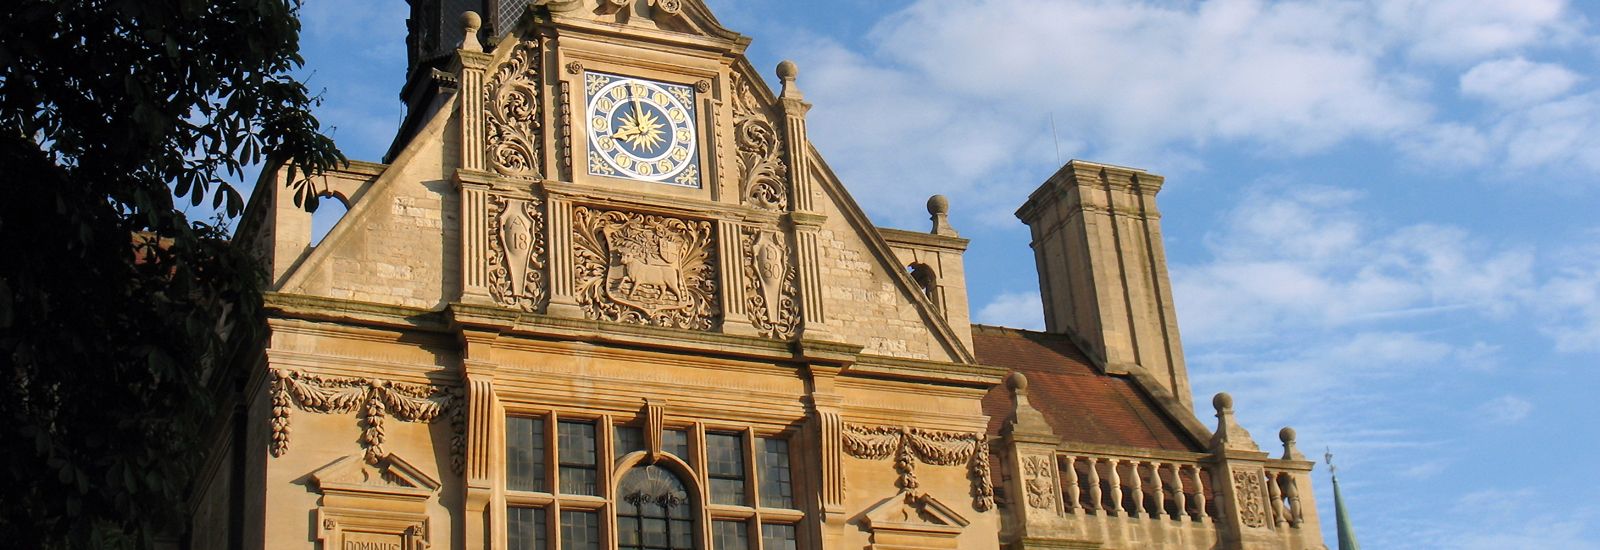 The History Faculty building with clock against a blue sky